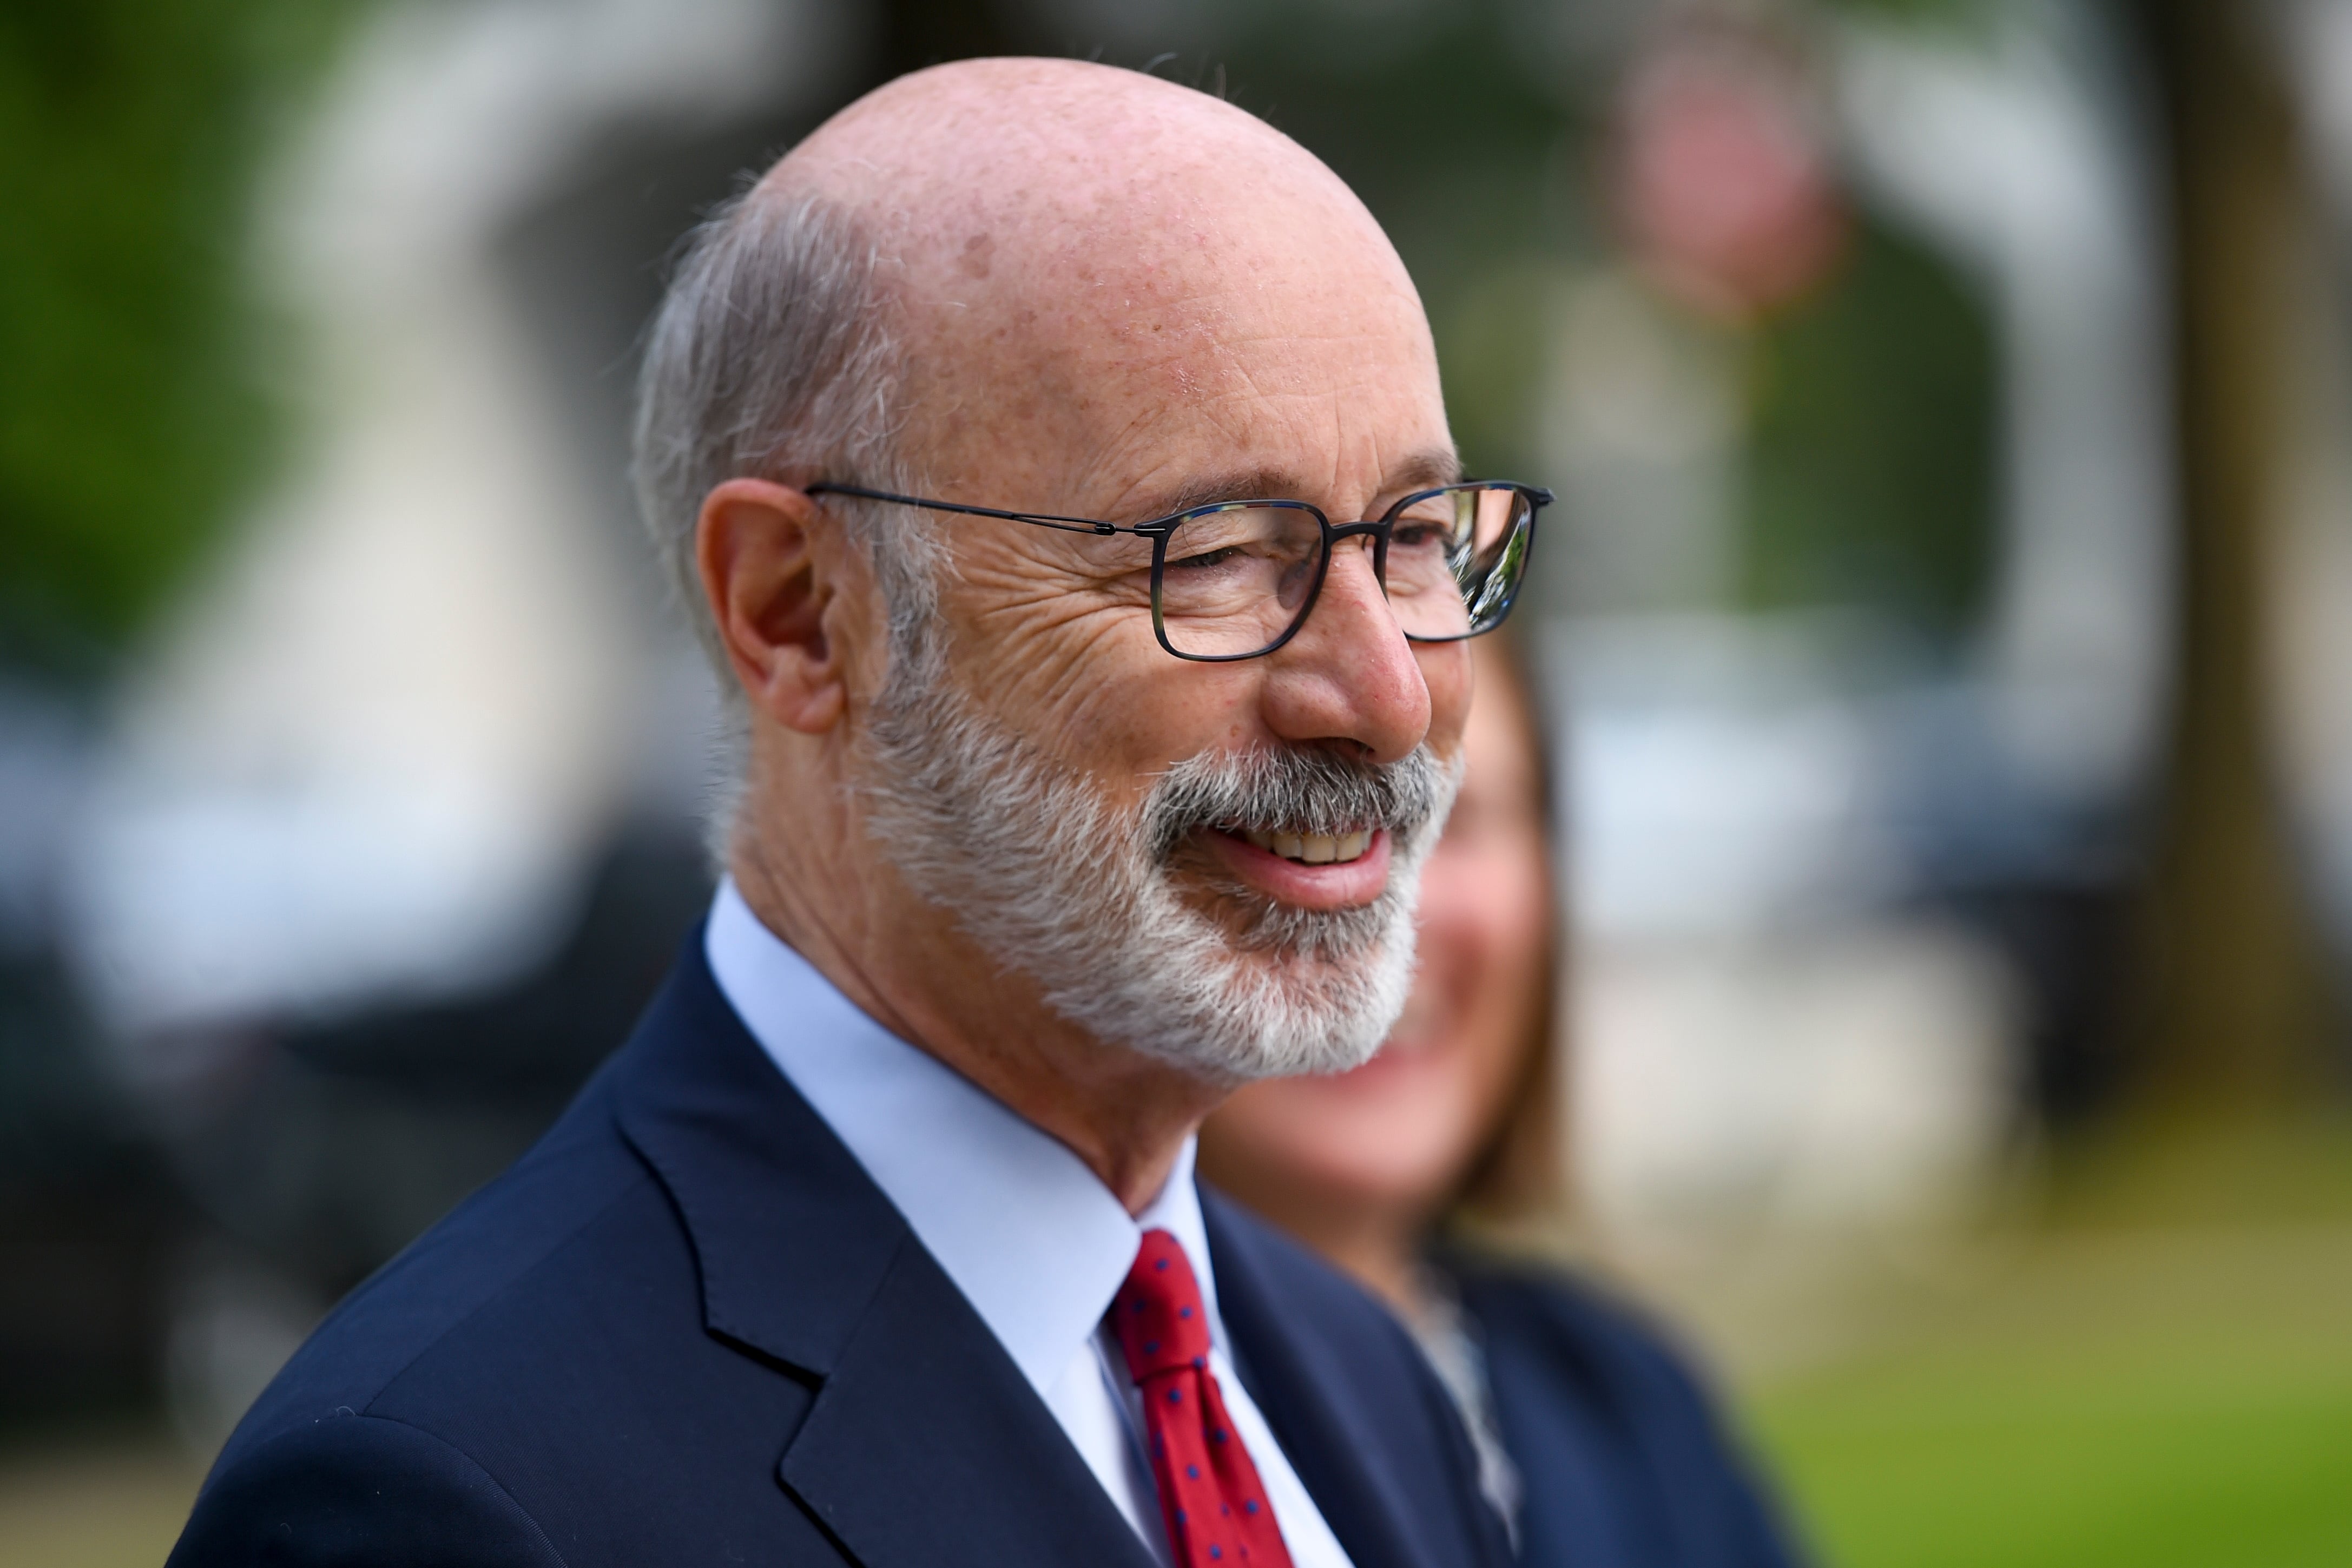 Closeup of Tom Wolf in profile, smiling and listening at an outdoor event, wearing a blue suit and red tie